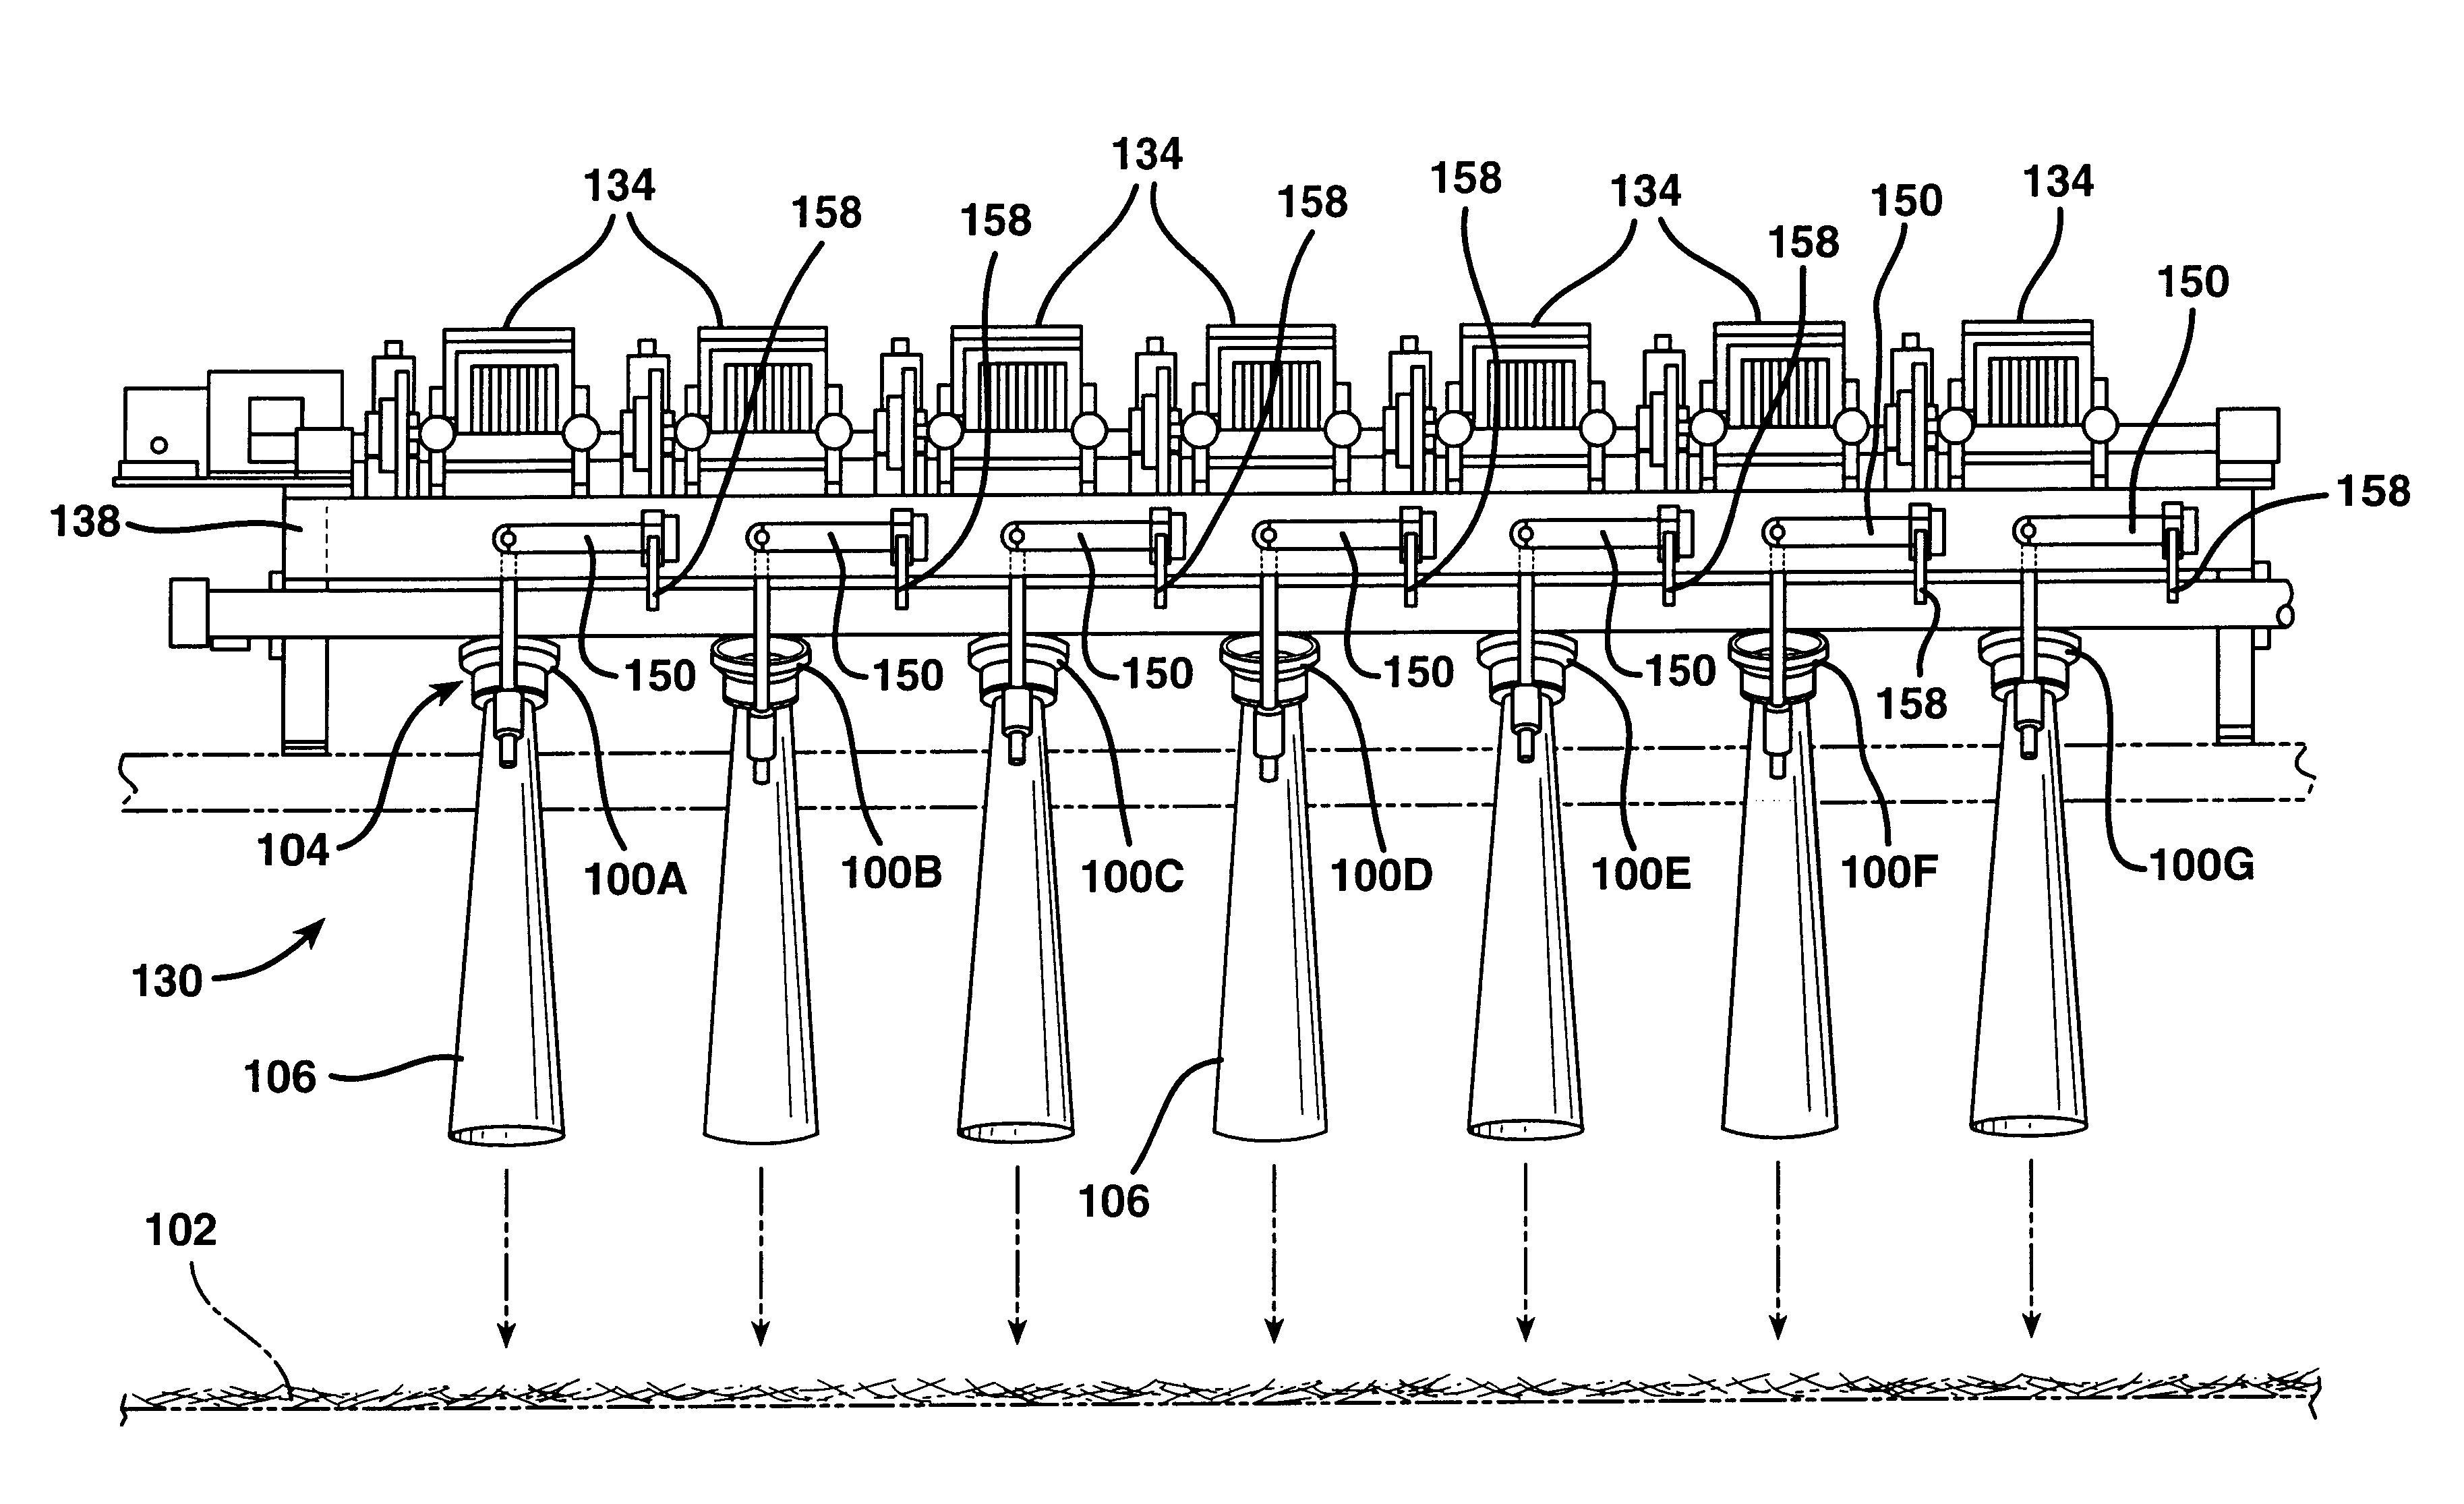 Apparatus to control the dispersion and deposition of chopped fibrous strands